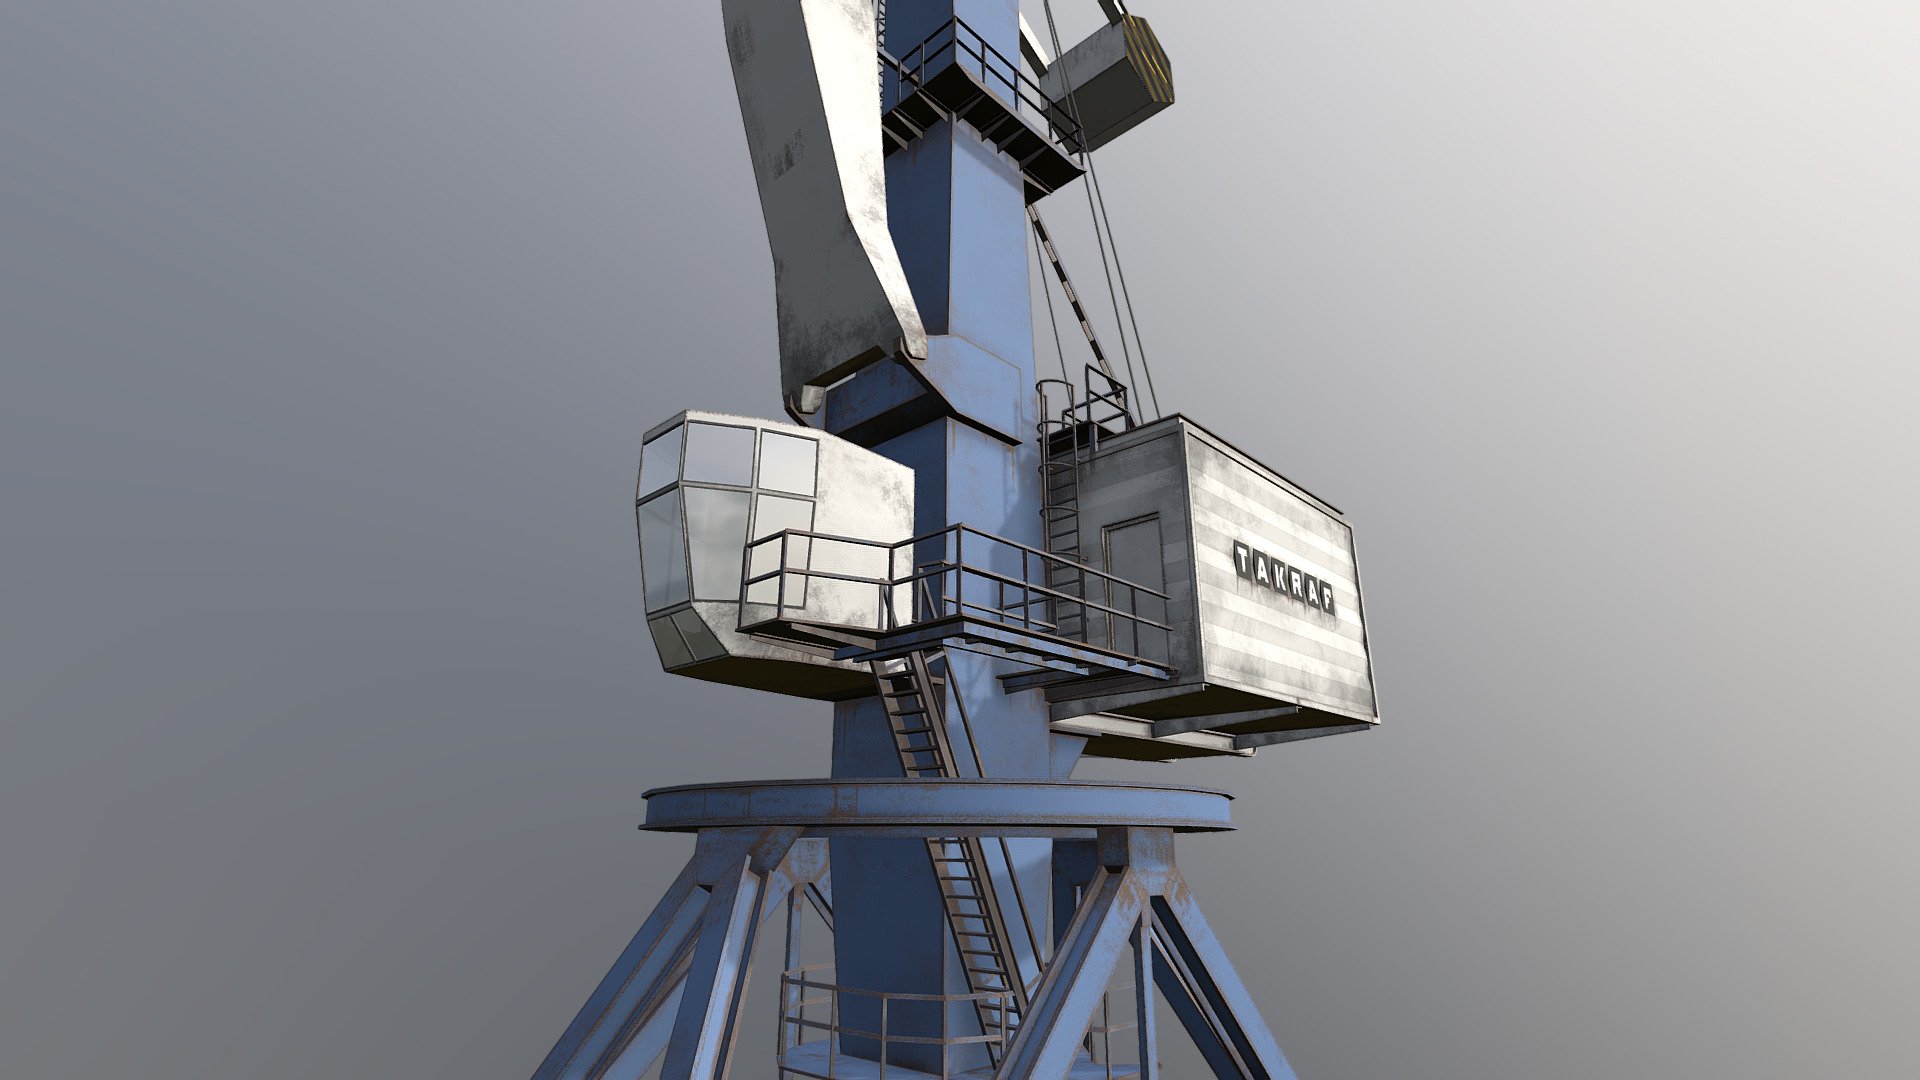 Port crane, low poly, modeled by hand from photos taken by myself. The texture is made by hand with a shader and baked in a blender 3d model